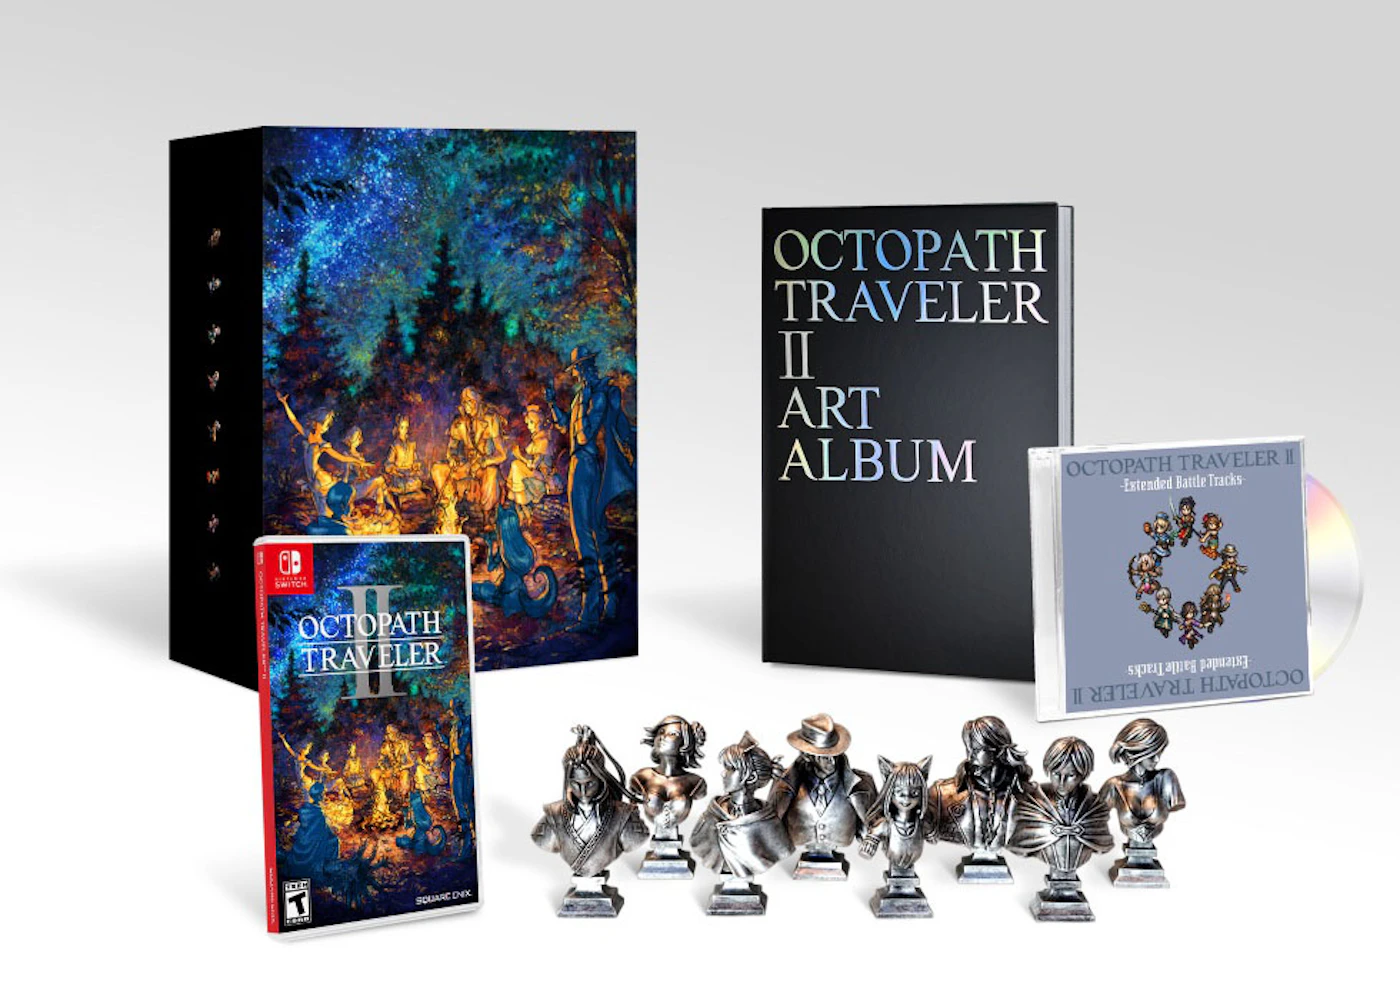 Square Enix Nintendo Switch Octopath Traveler II Collector's Edition Set  Video Game Bundle - GB